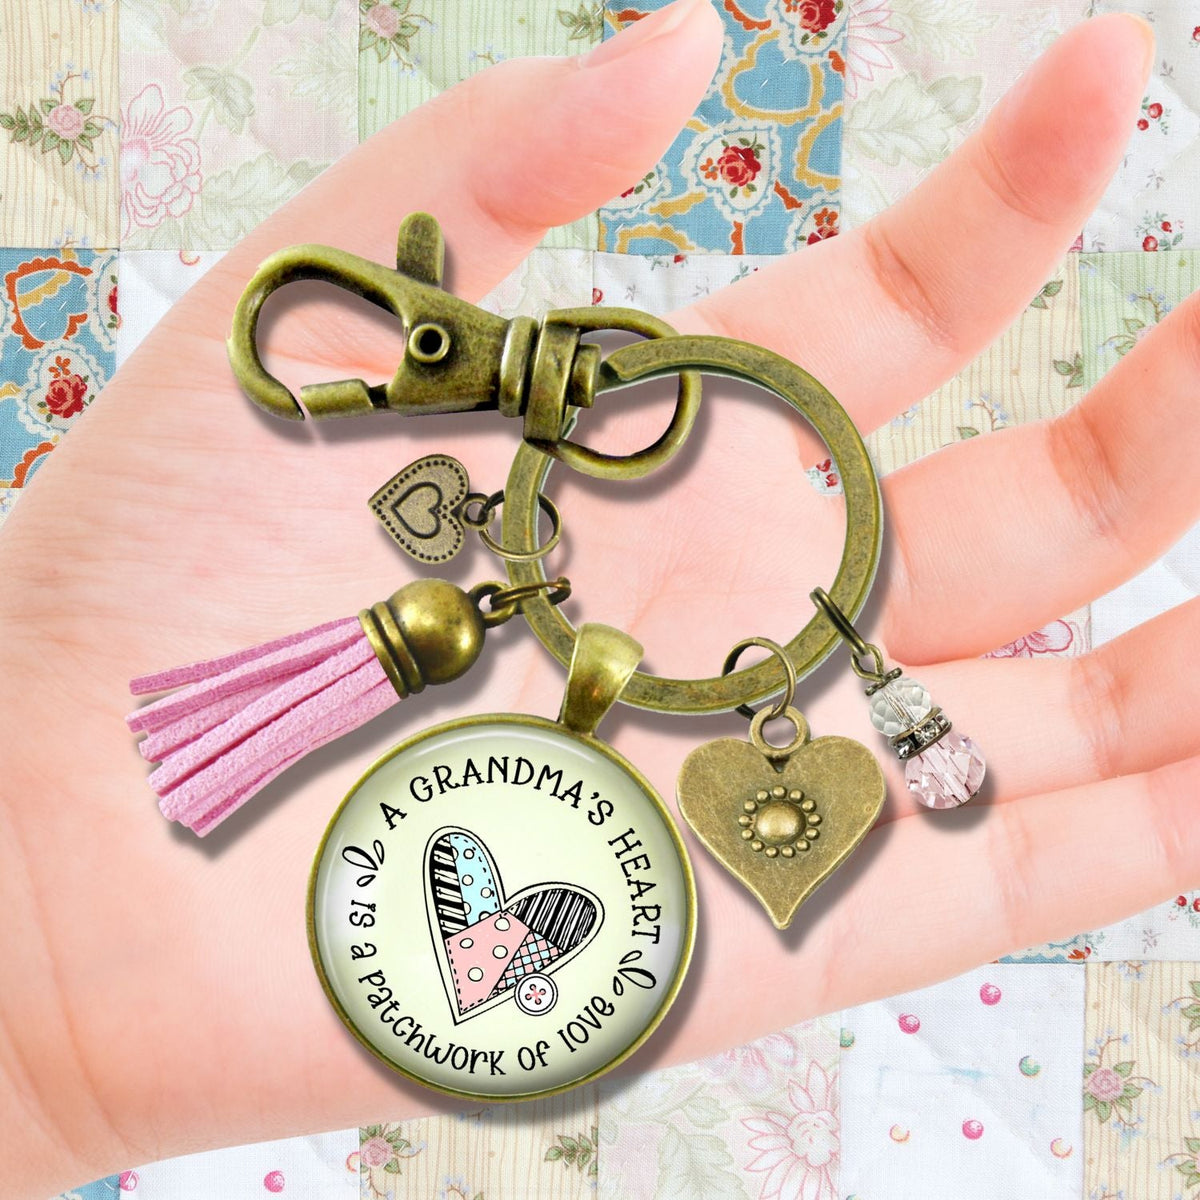 Handmade Gutsy Goodness Jewelry Grandmother Keychain Gift Grandma's Heart Is A Patchwork of Love Jewelry, Tassel & Meaningful Card